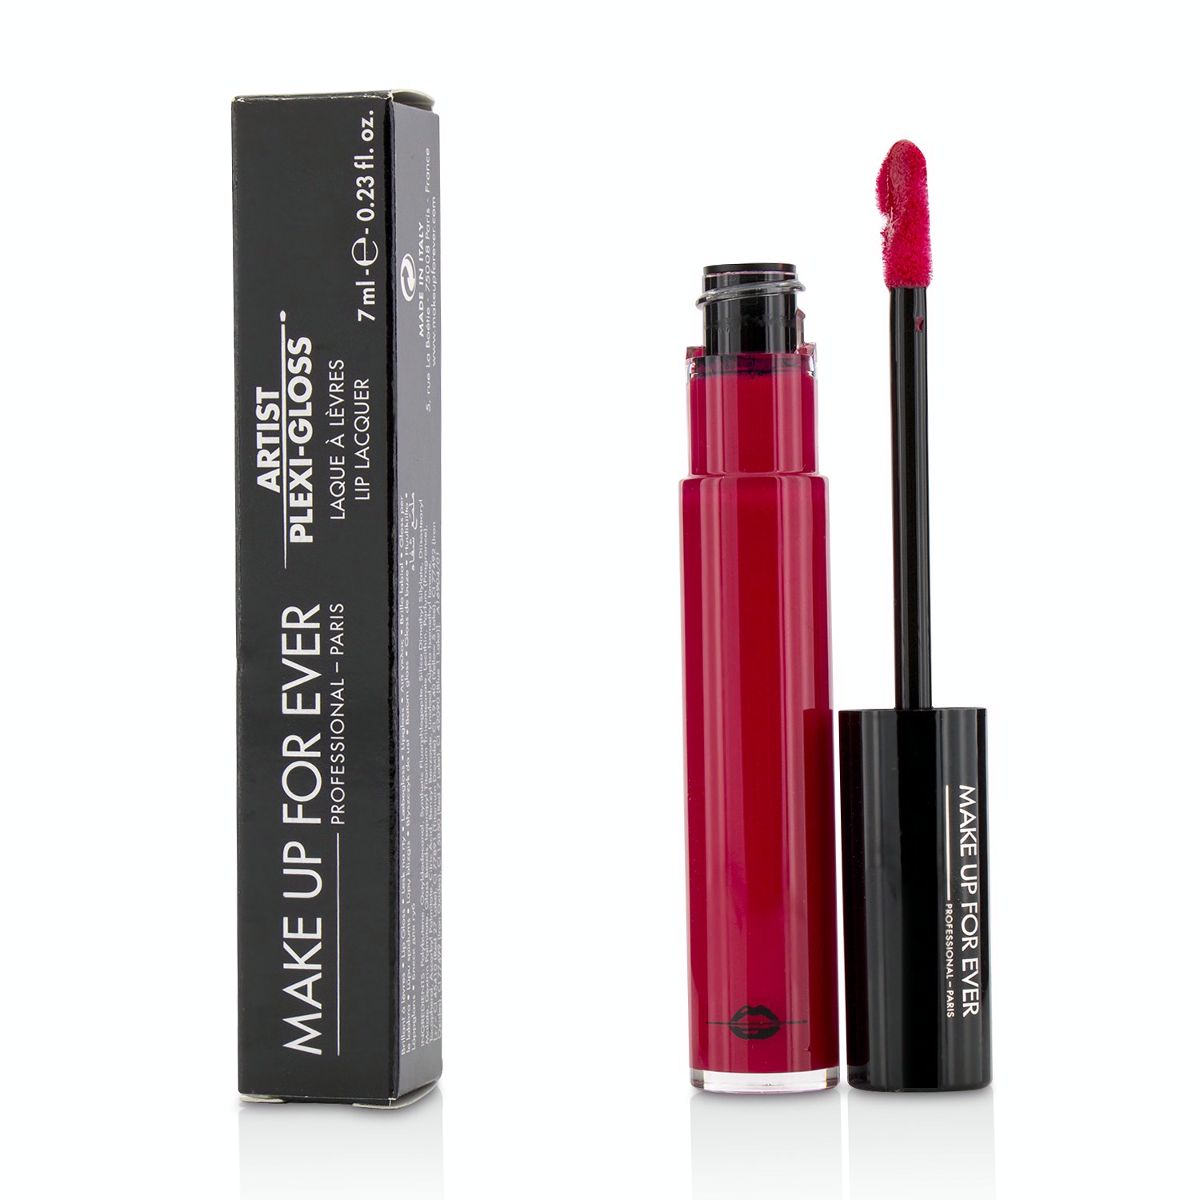 Artist Plexi Gloss Lip Lacquer - # 403 (Red) Make Up For Ever Image